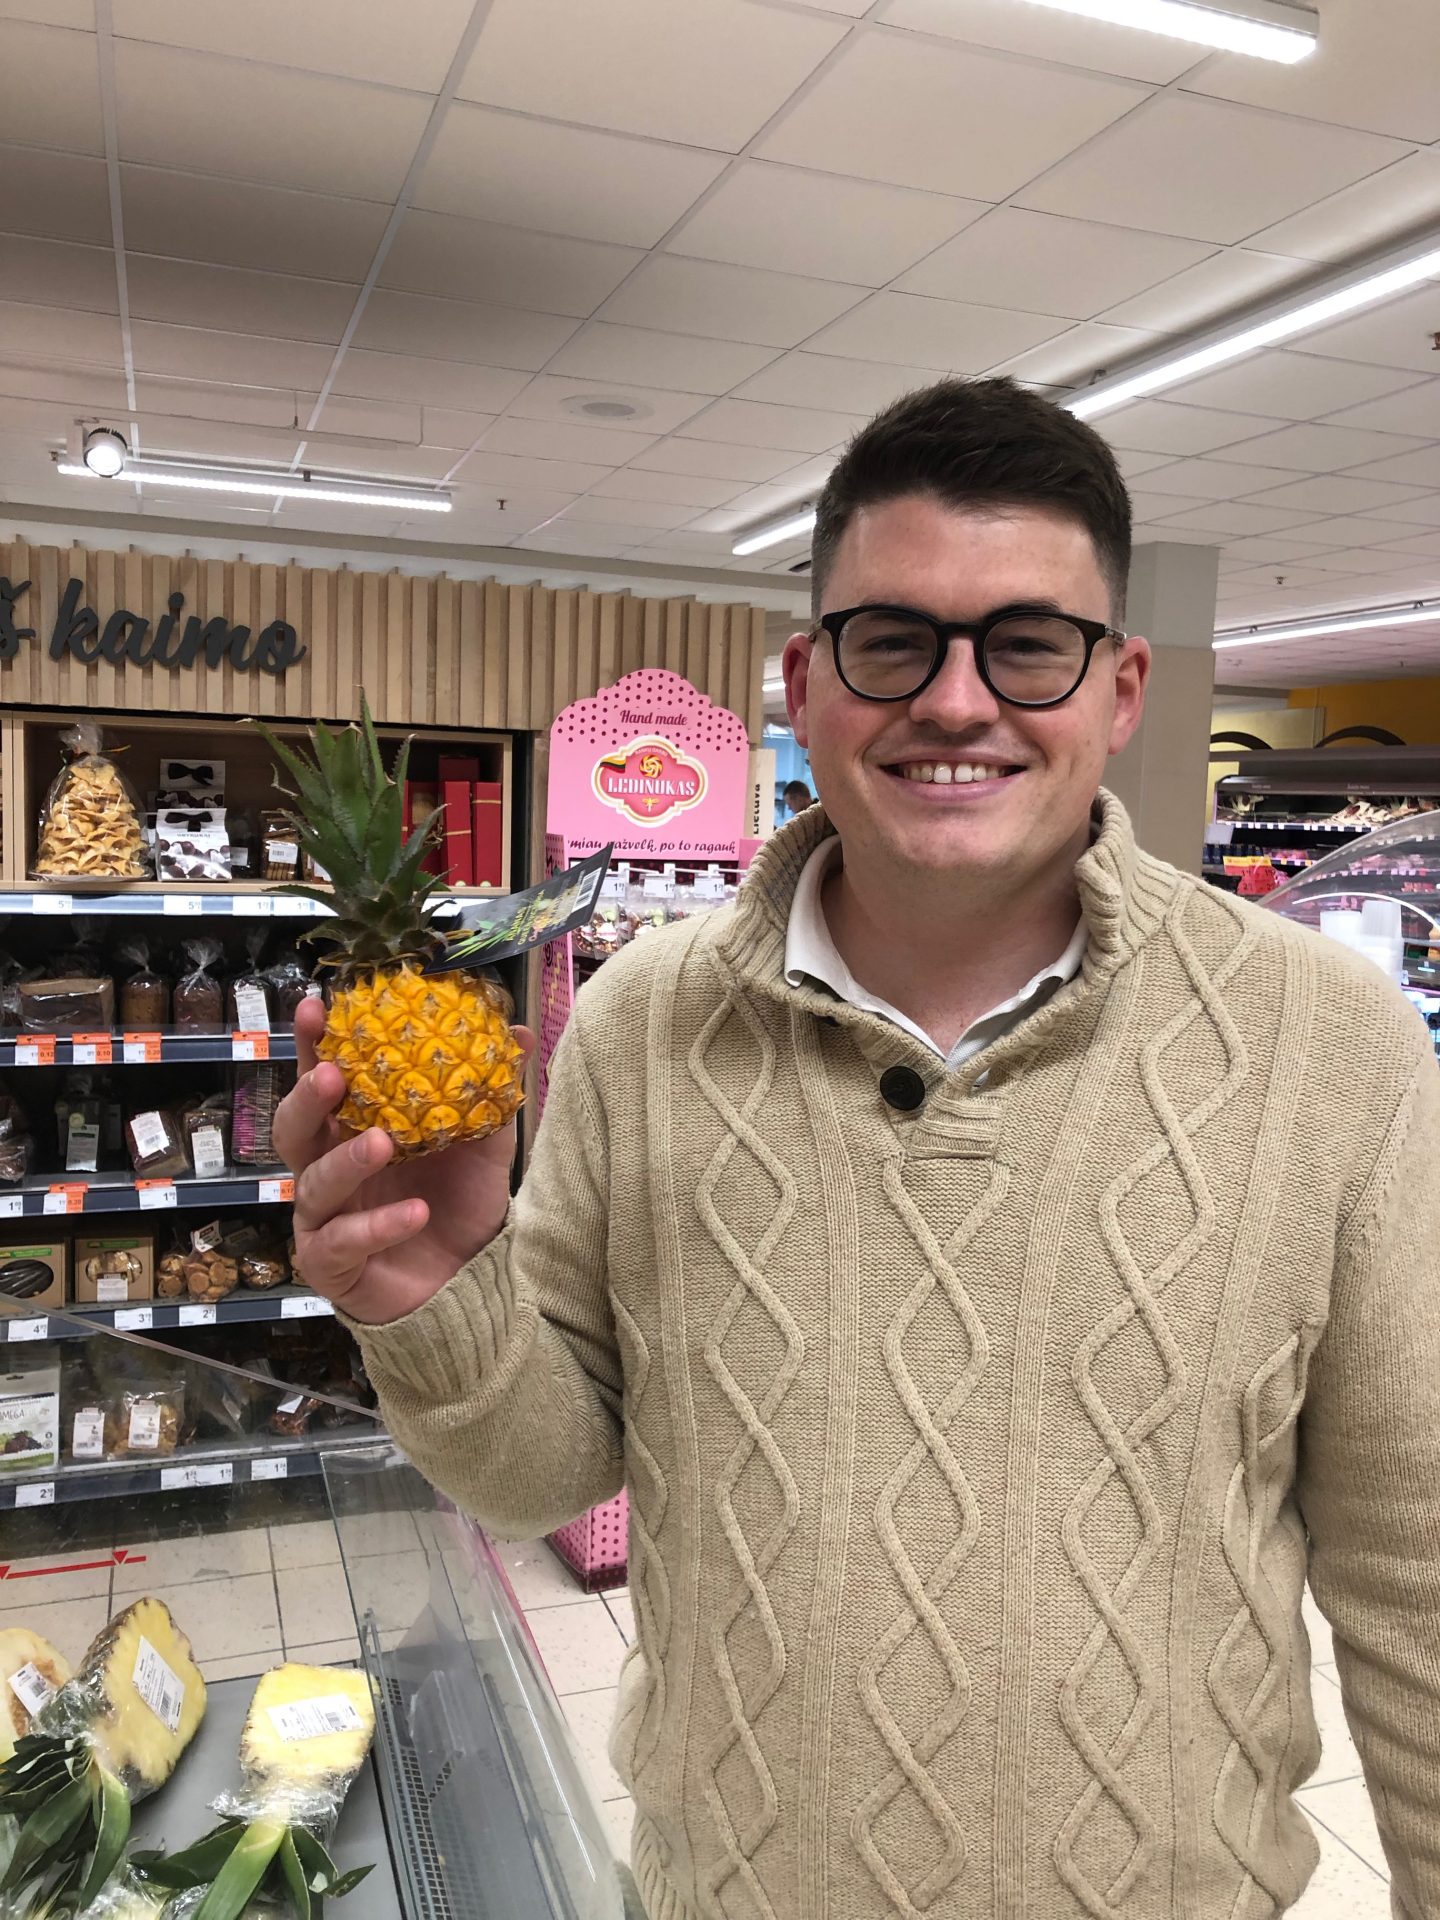 things to do in Vilnius in winter: Billy in a supermarket in Vilnius holding a tiny pineapple and laughing